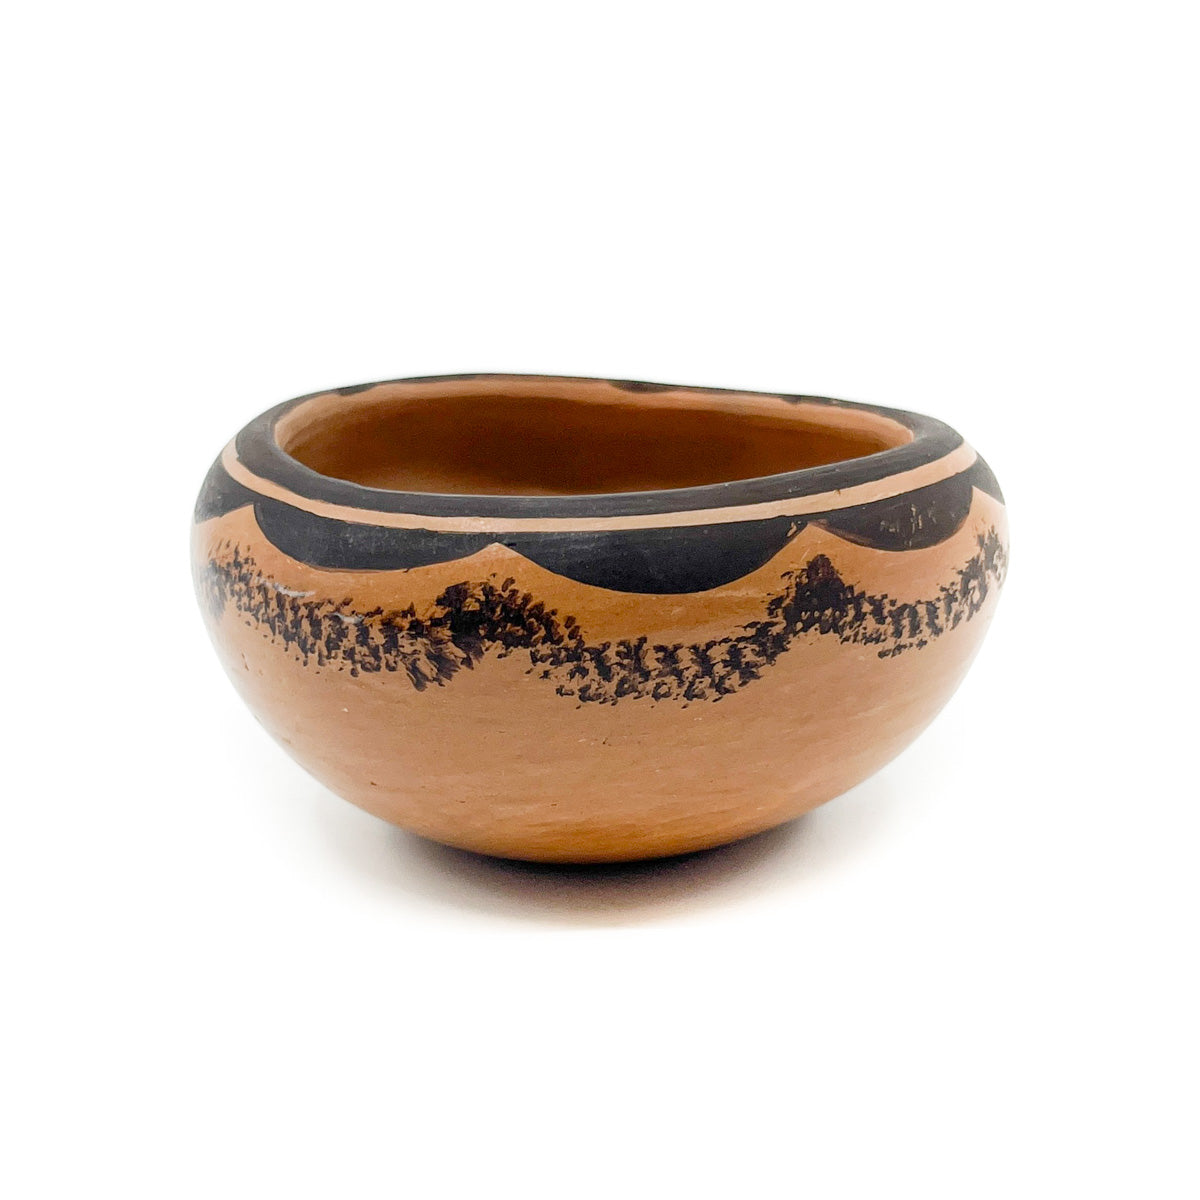 Small Seed Pot with Cloud Designs